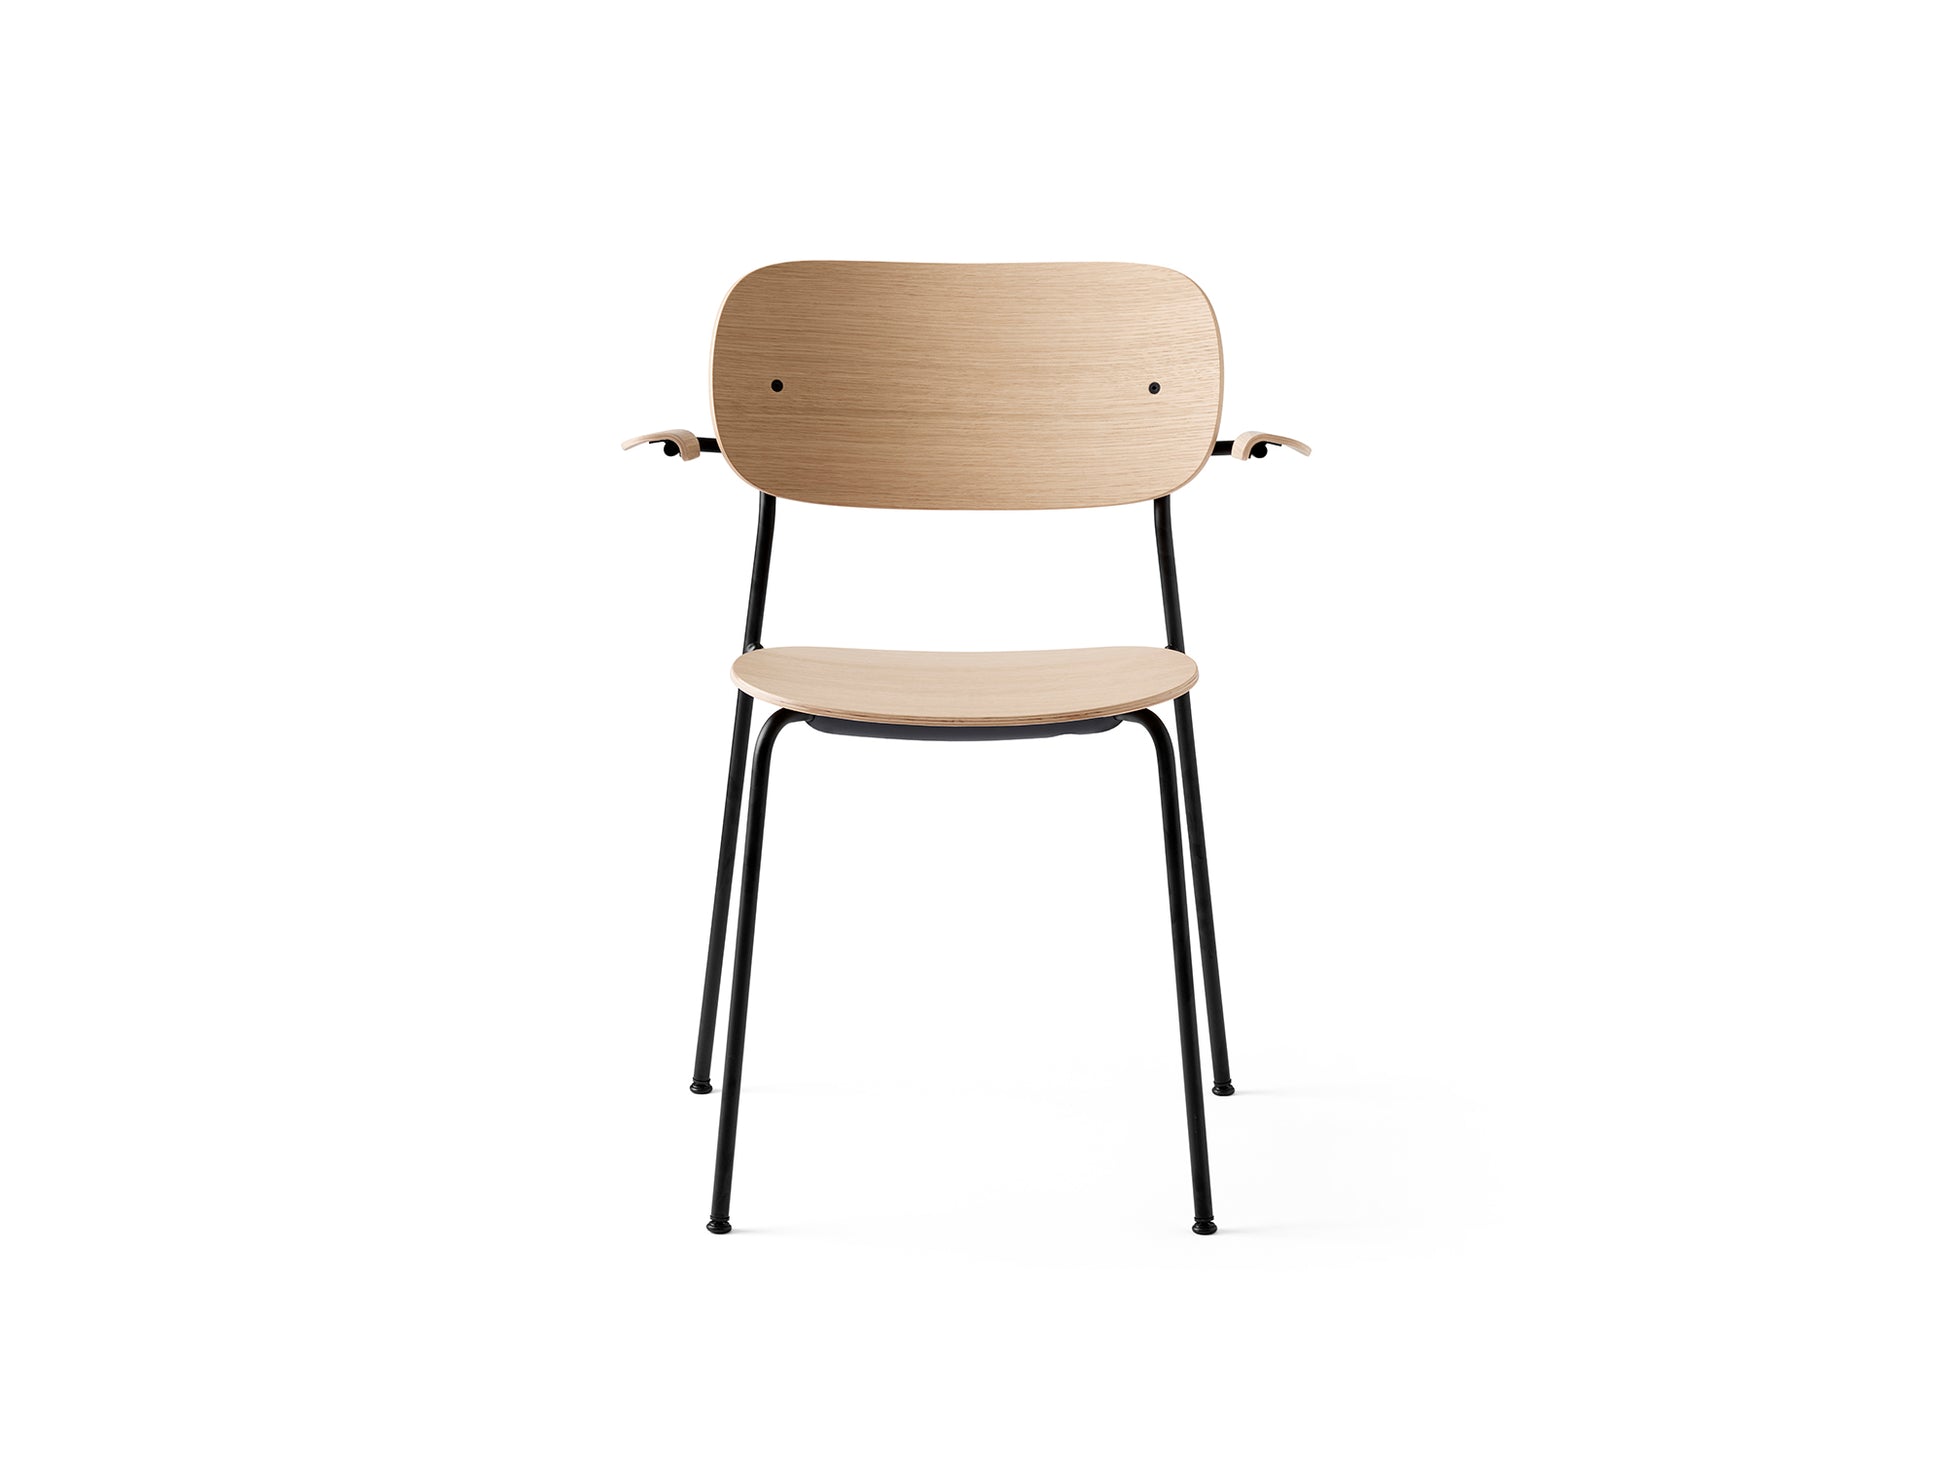 Co Dining Chair by Menu - With Armrest / Black Powder Coated Steel / Natural Oak